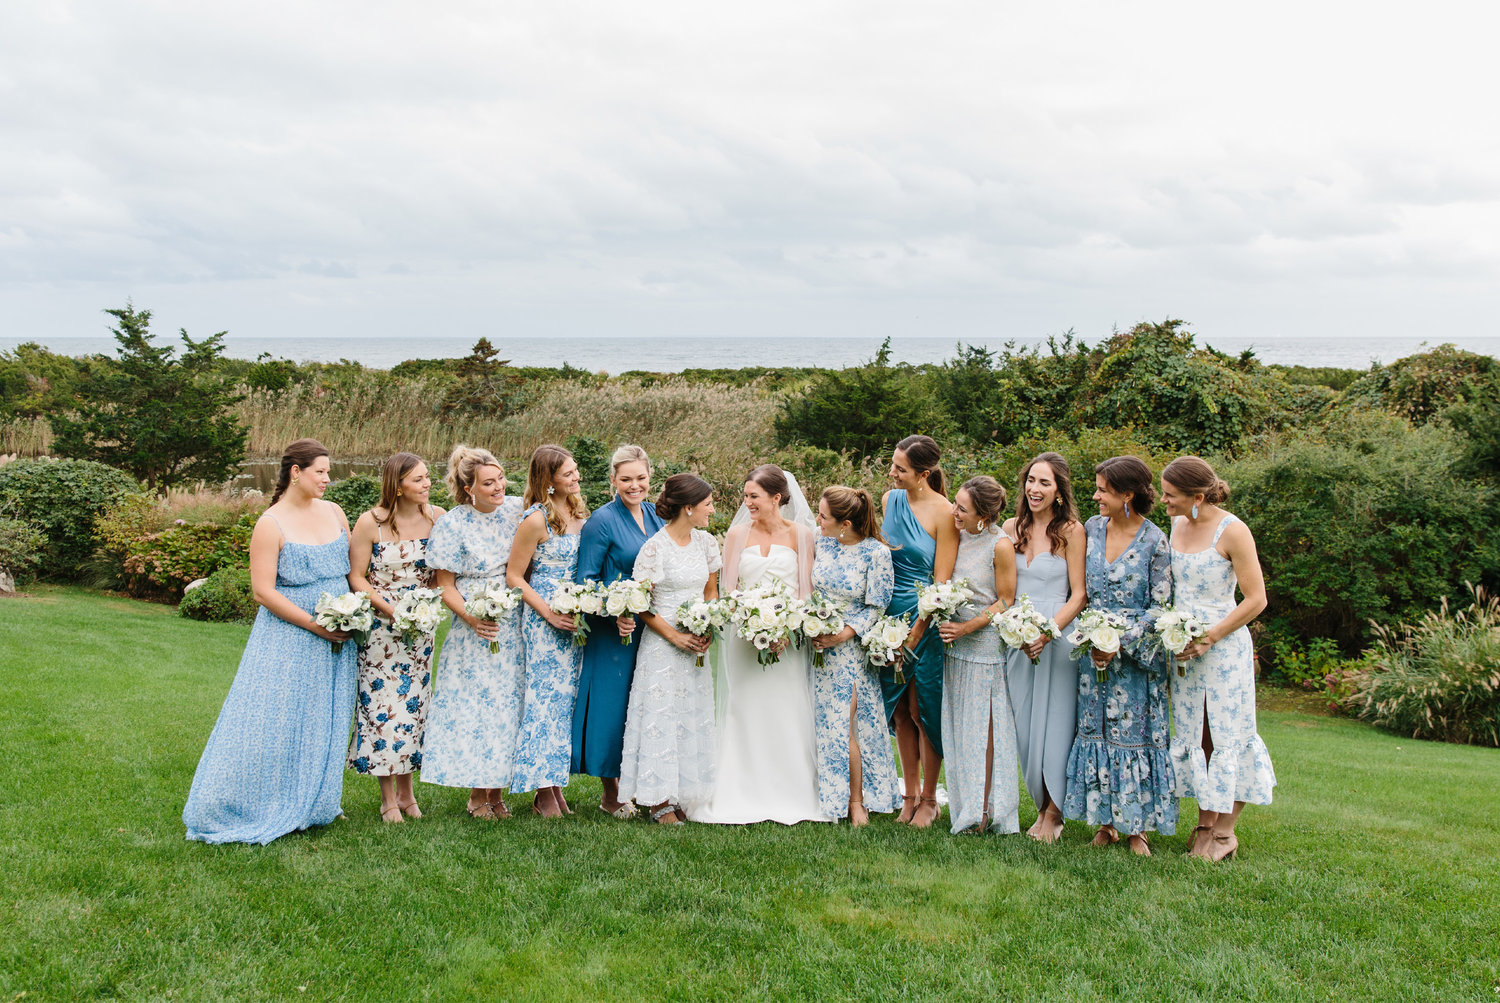 The simple palette of blue and white was given to these friends for a coastal wedding at a private home. They ended up choosing all different shades from azure to dusty blue, and patterns from whimsical to floral to solid